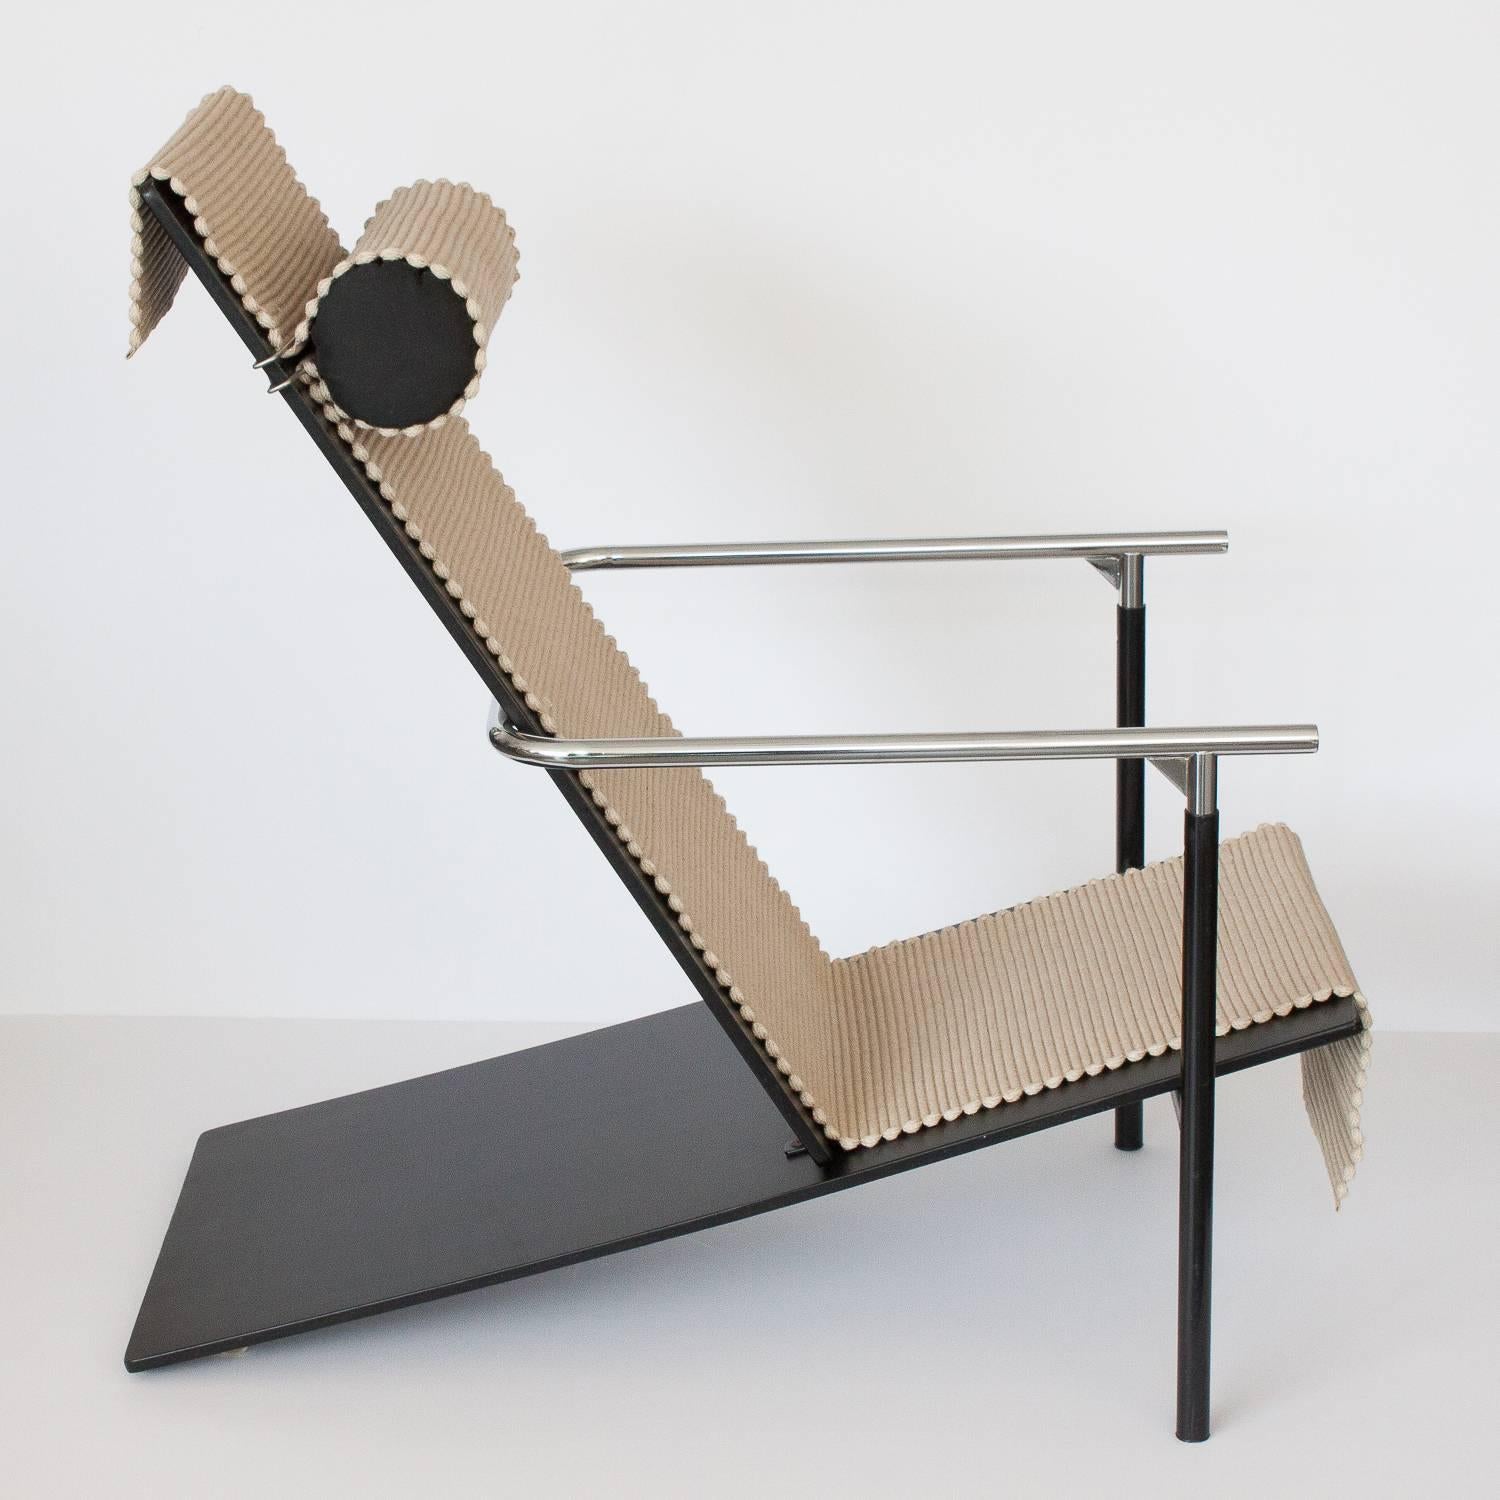 The Inna armchair designed in 1982 by student designer Pentti Hakala. Produced by Inno-tuote Oy, Finland. This Minimalist chair was designed to be assembled by the buyer. The materials are steel and plywood. Sprung casters on the rear of bottom